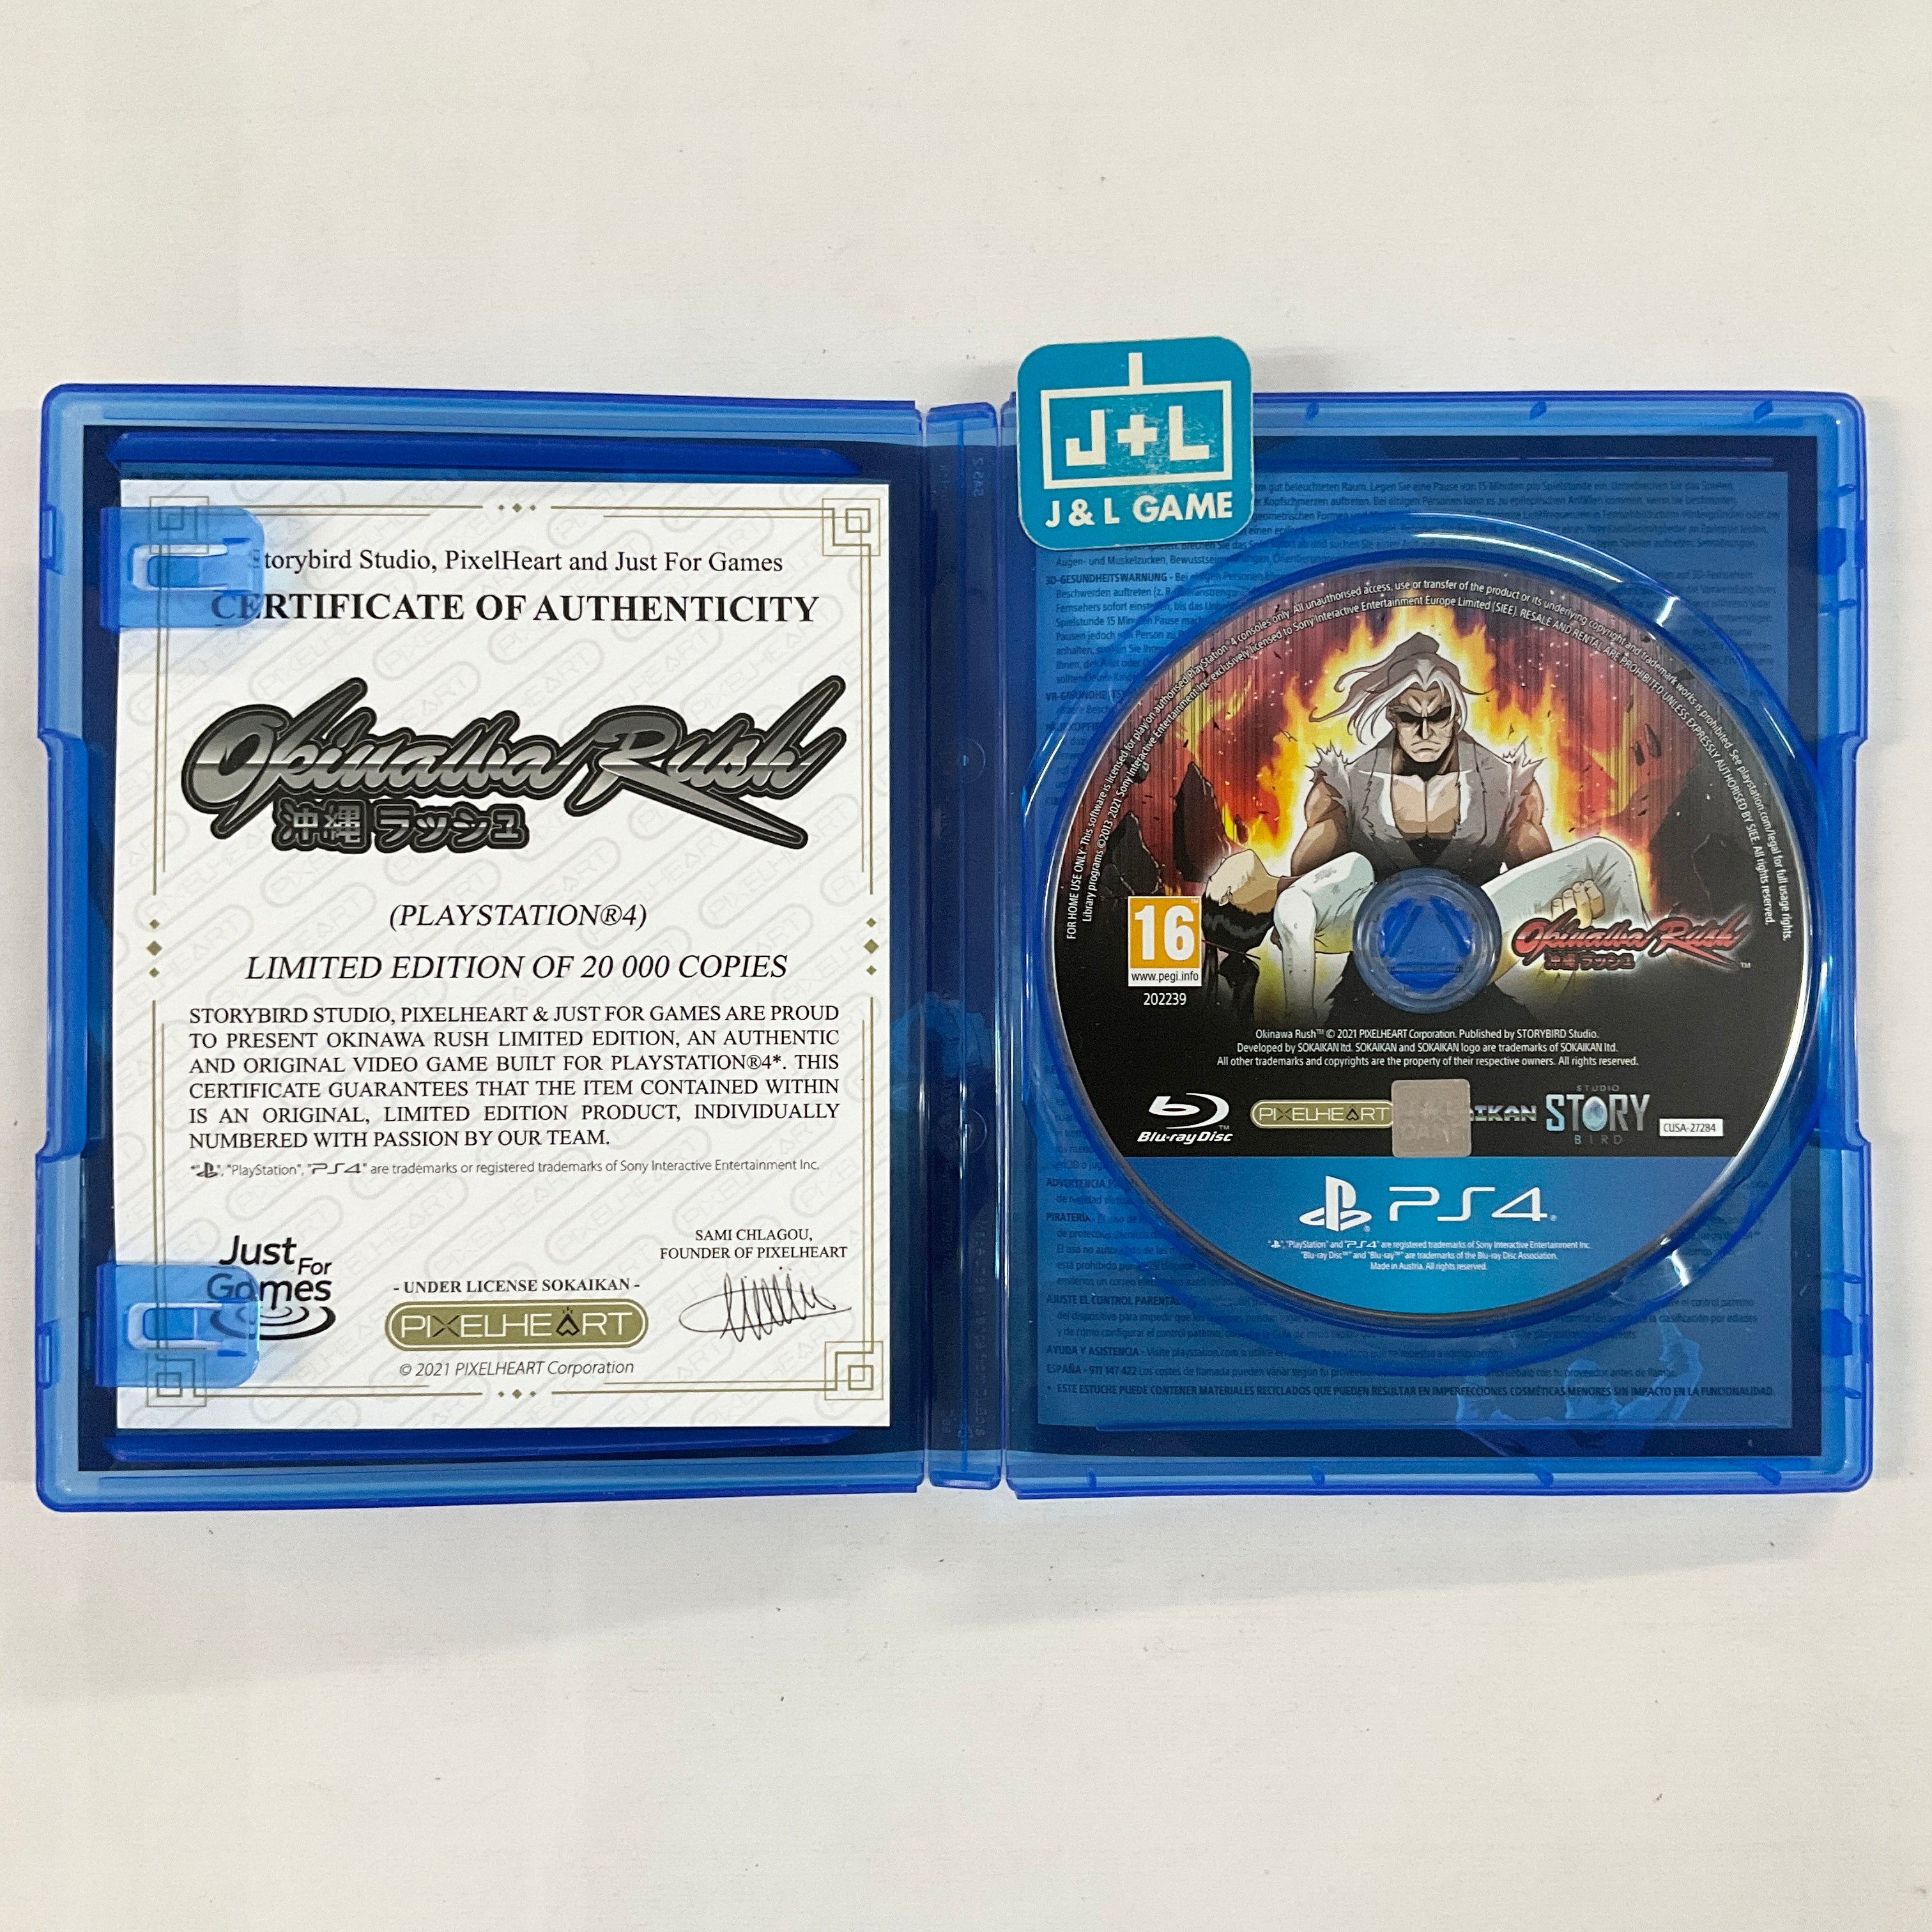 Okinawa Rush - (PS4) Playstation 4 [Pre-Owned] (European Import) Video Games Merge Games   